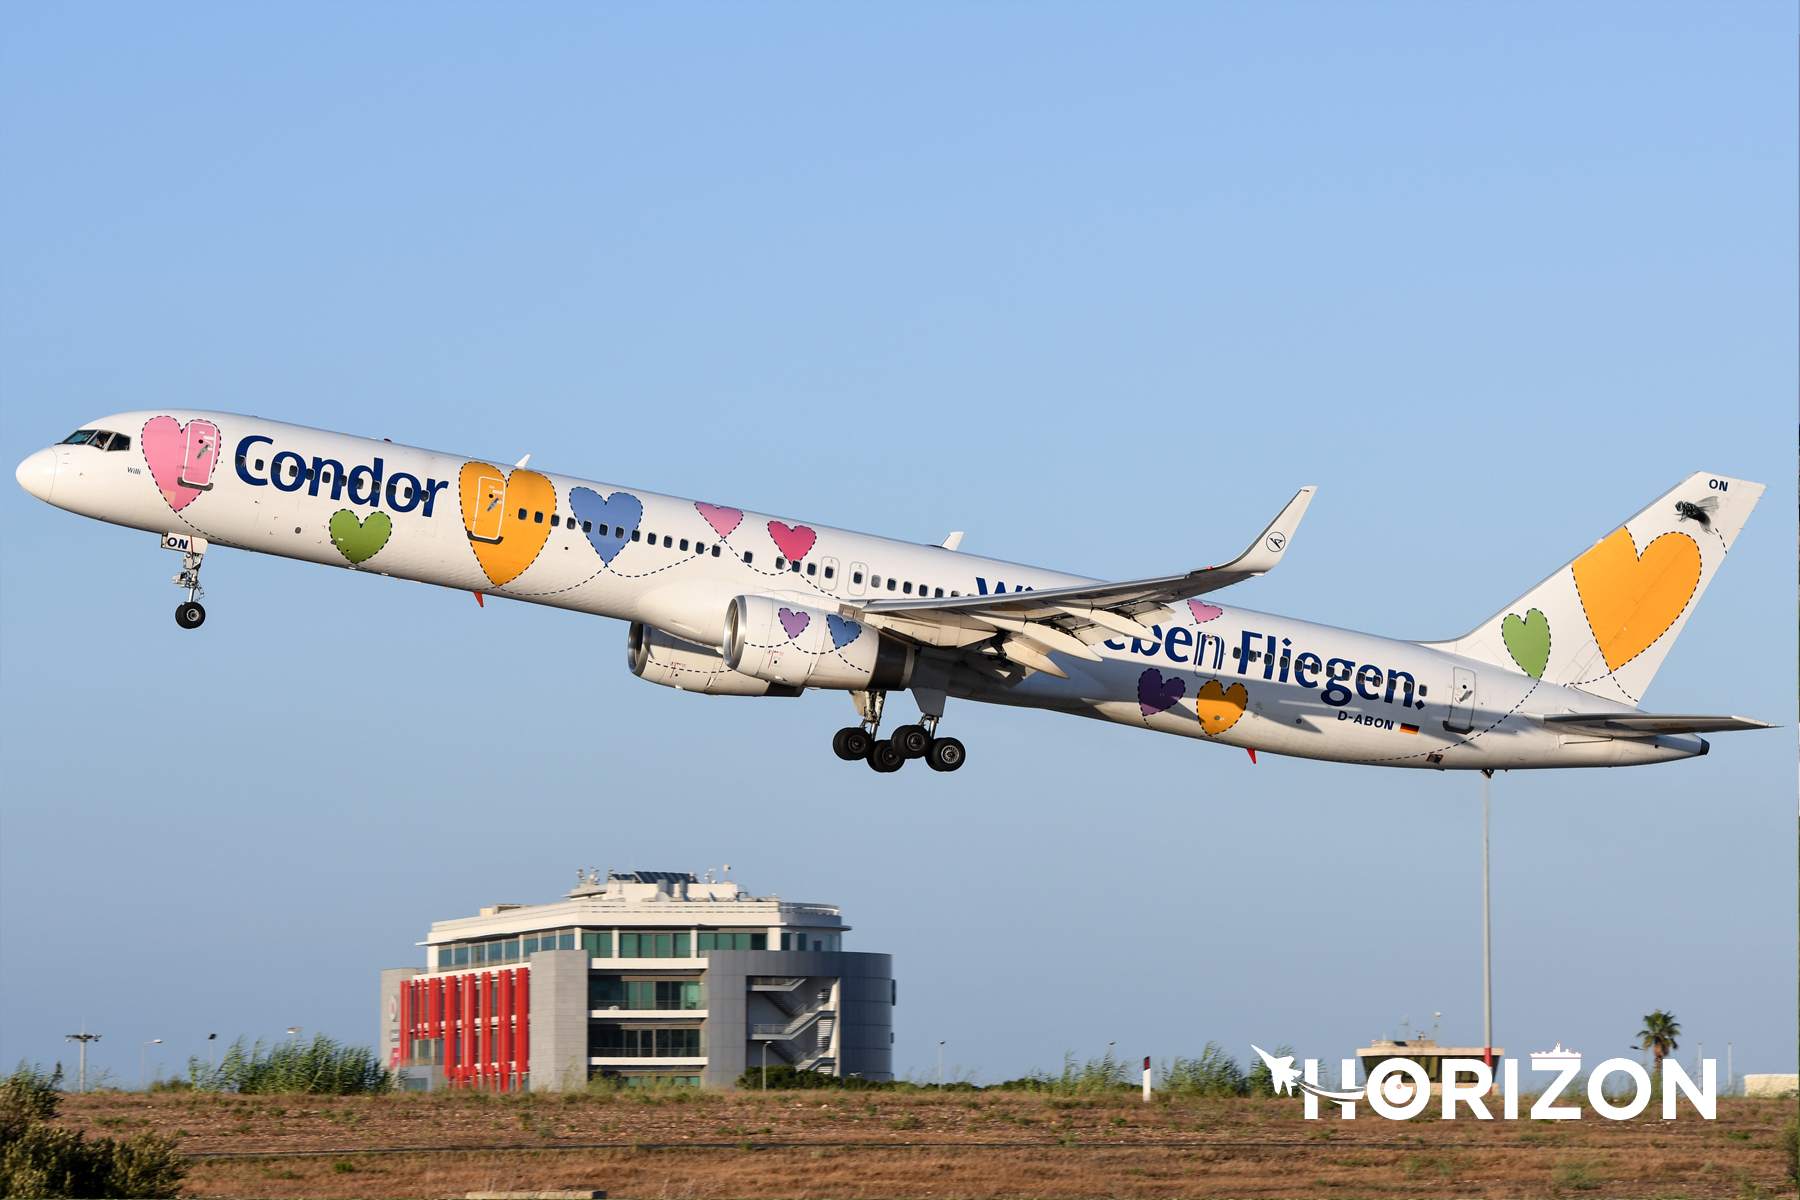 Condor was the first customer of the Boeing 757-300 which saw the first service with the German leisure carrier in 1999. Photo: Joseph Borg